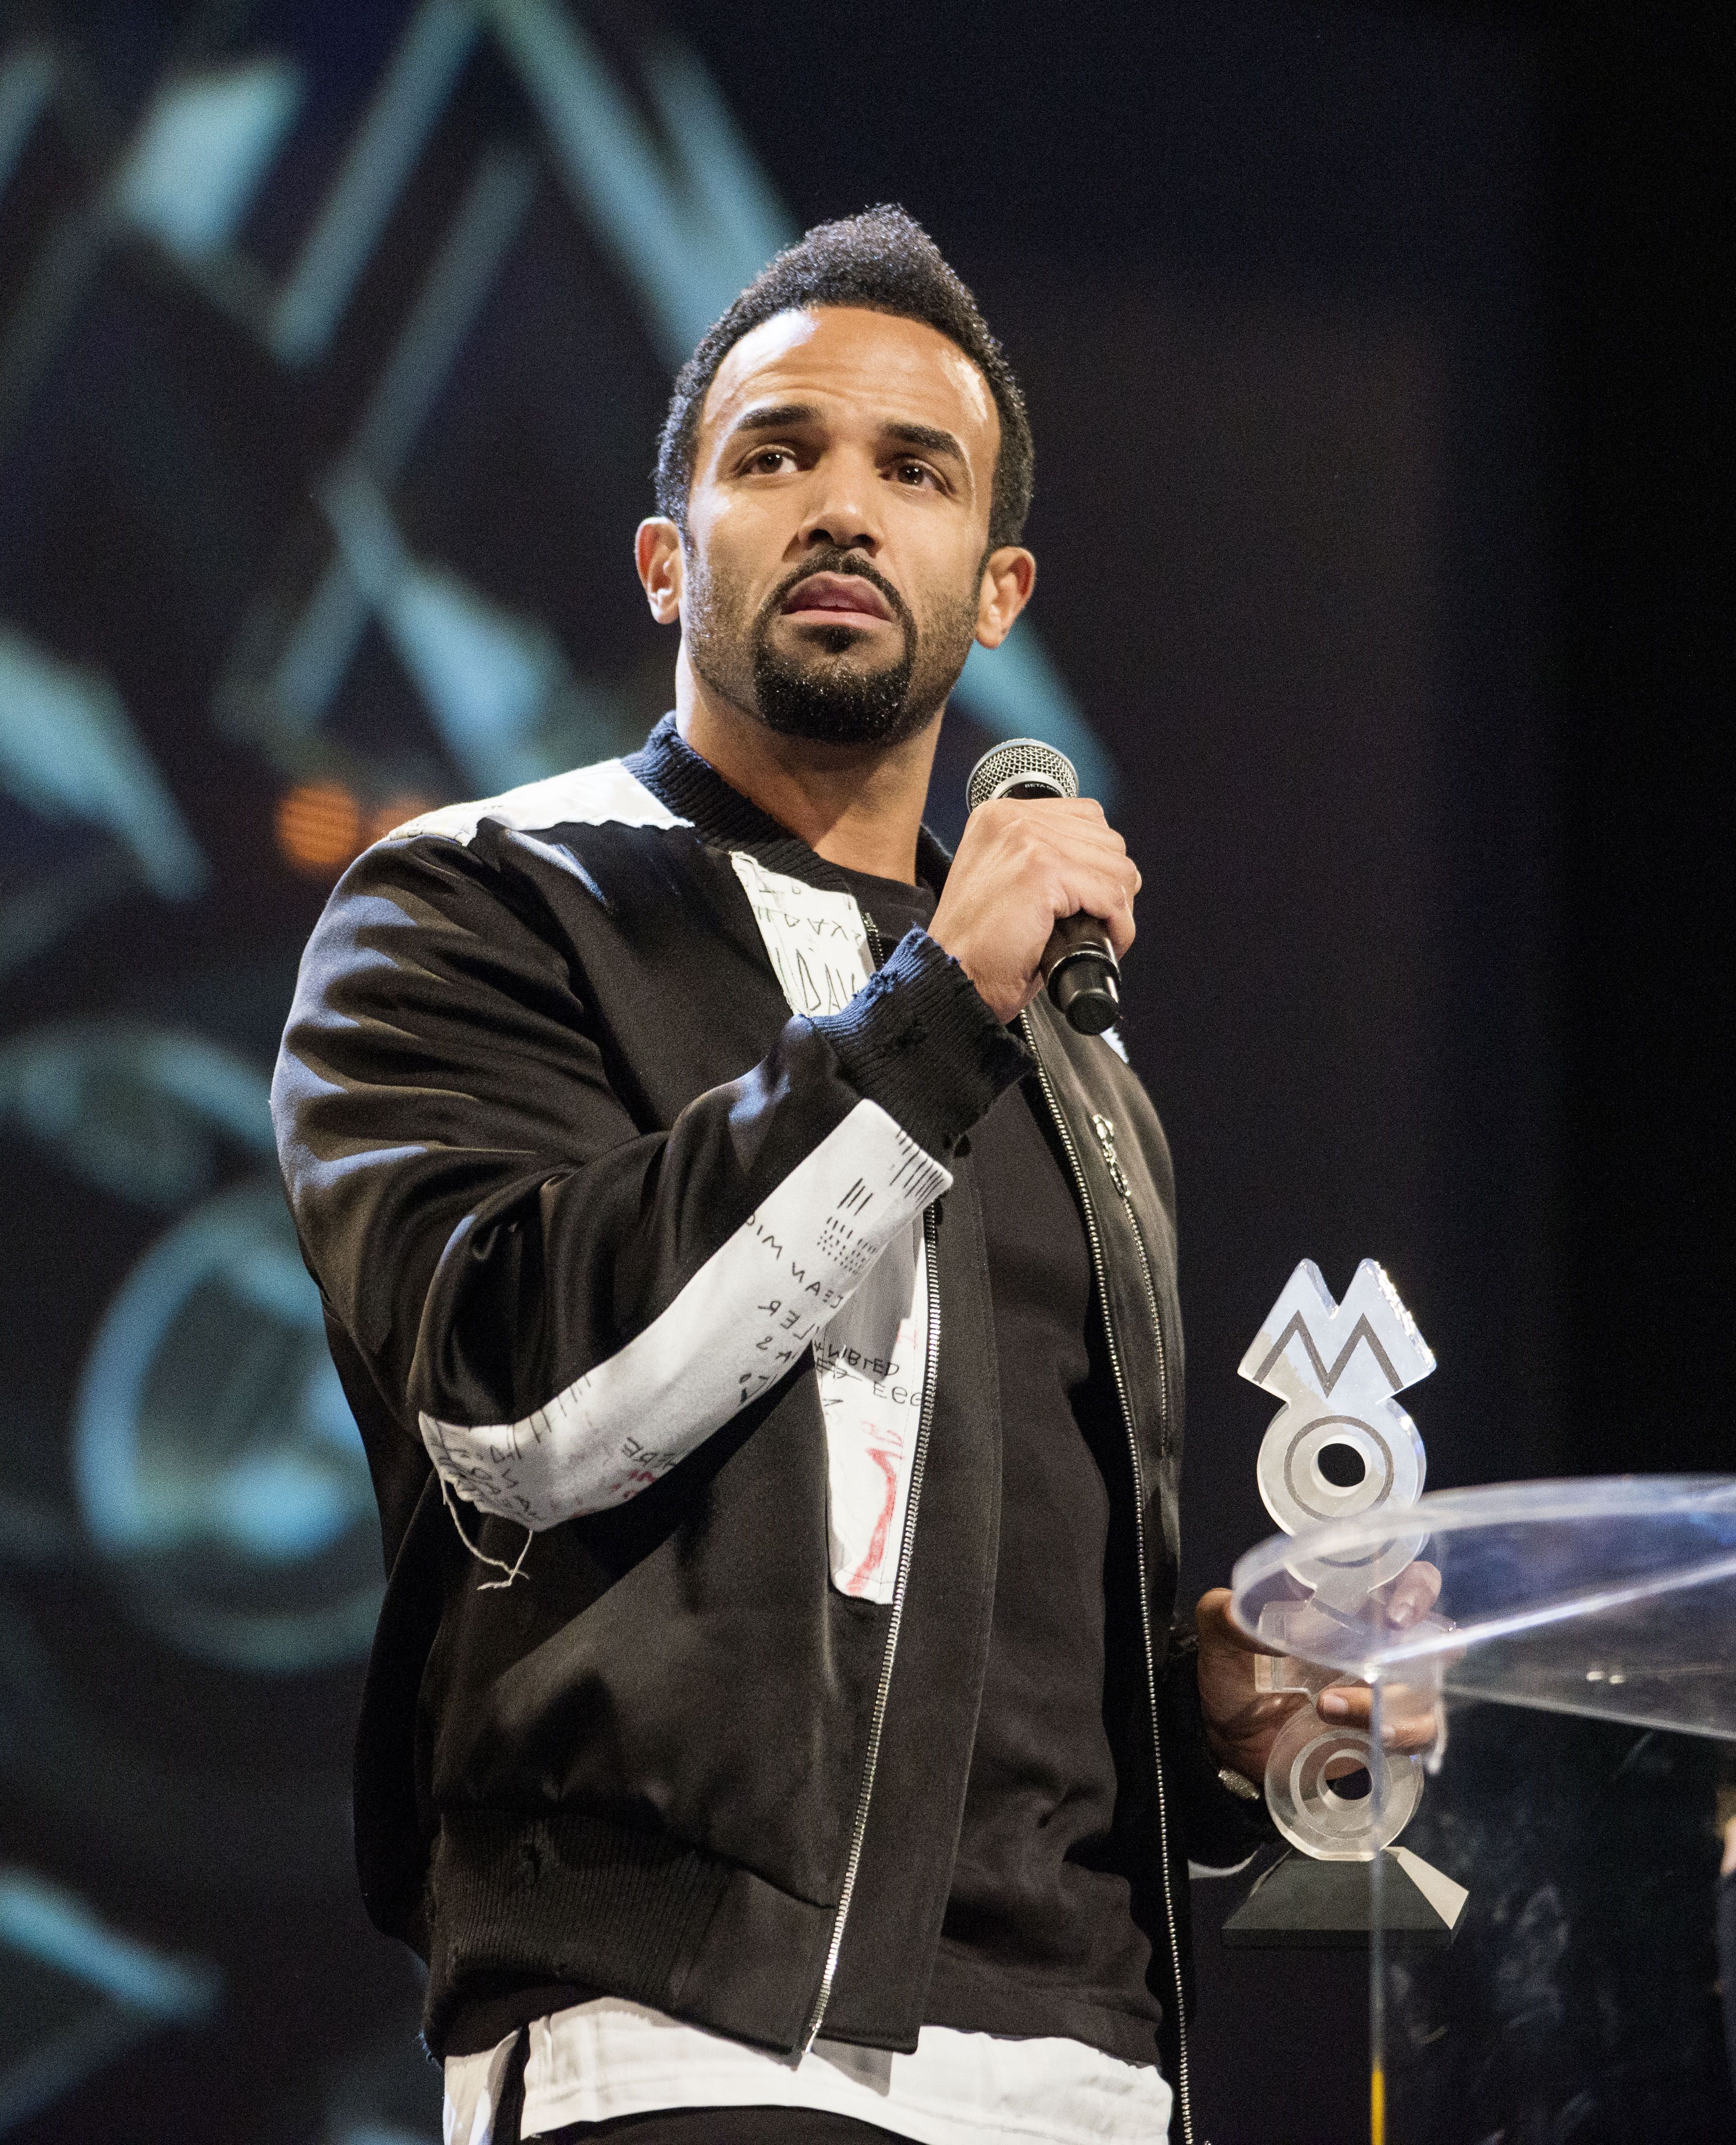 Craig David's brand new album is finally out! Listen to Following 